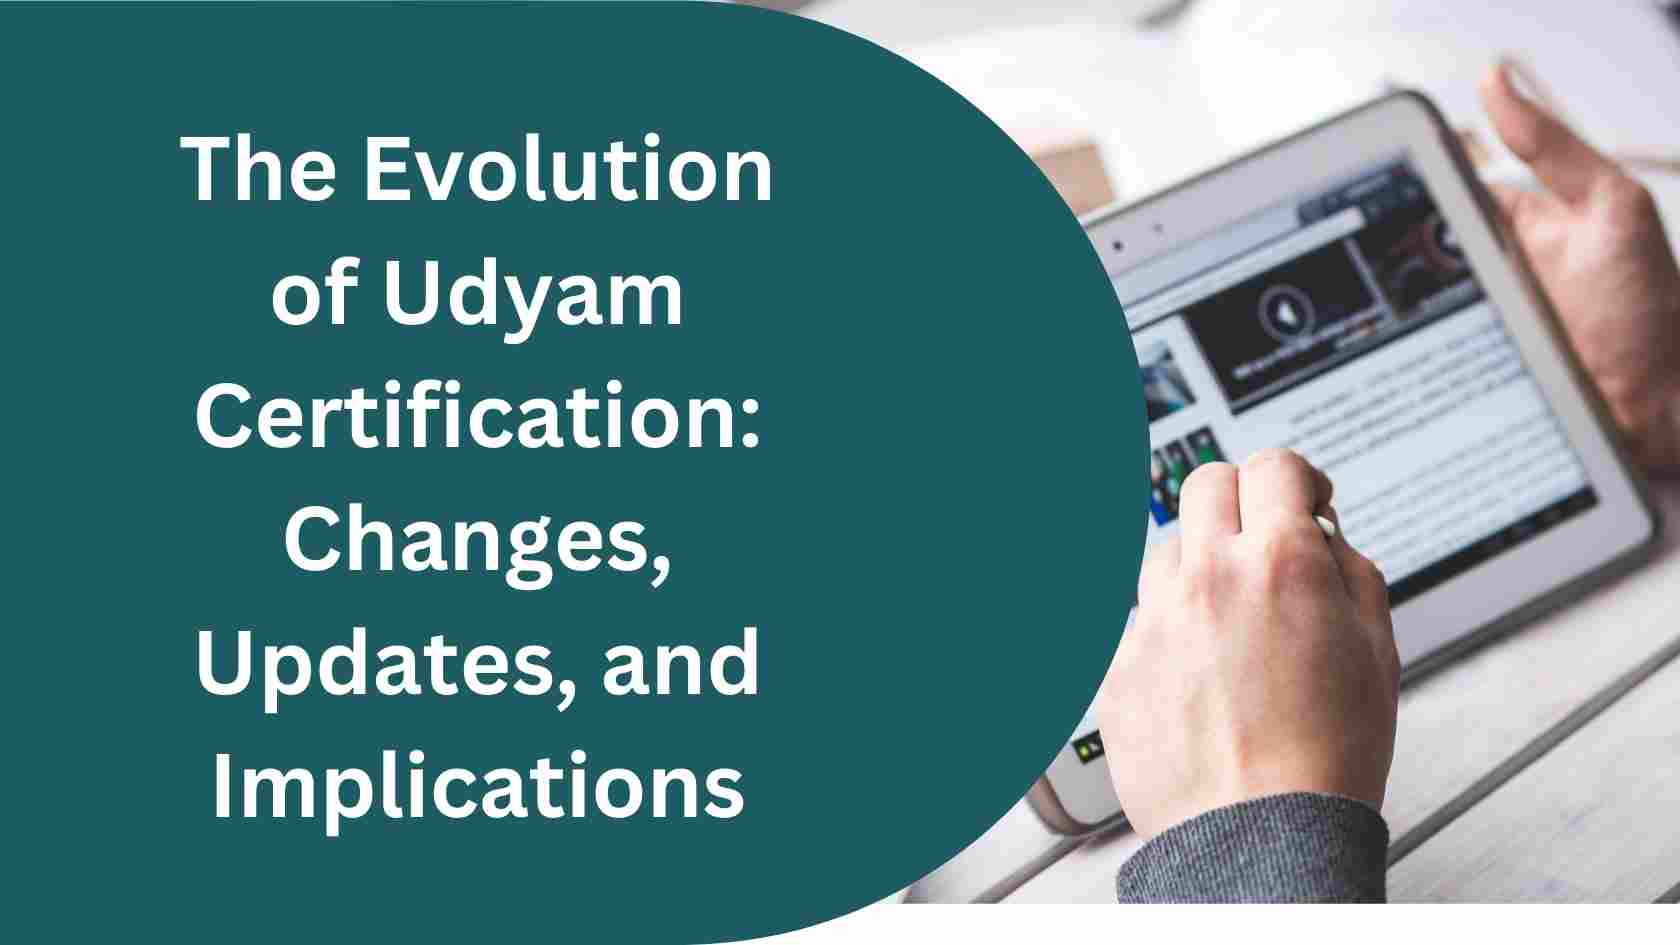 The Evolution of Udyam Certification Changes, Updates, and Implications